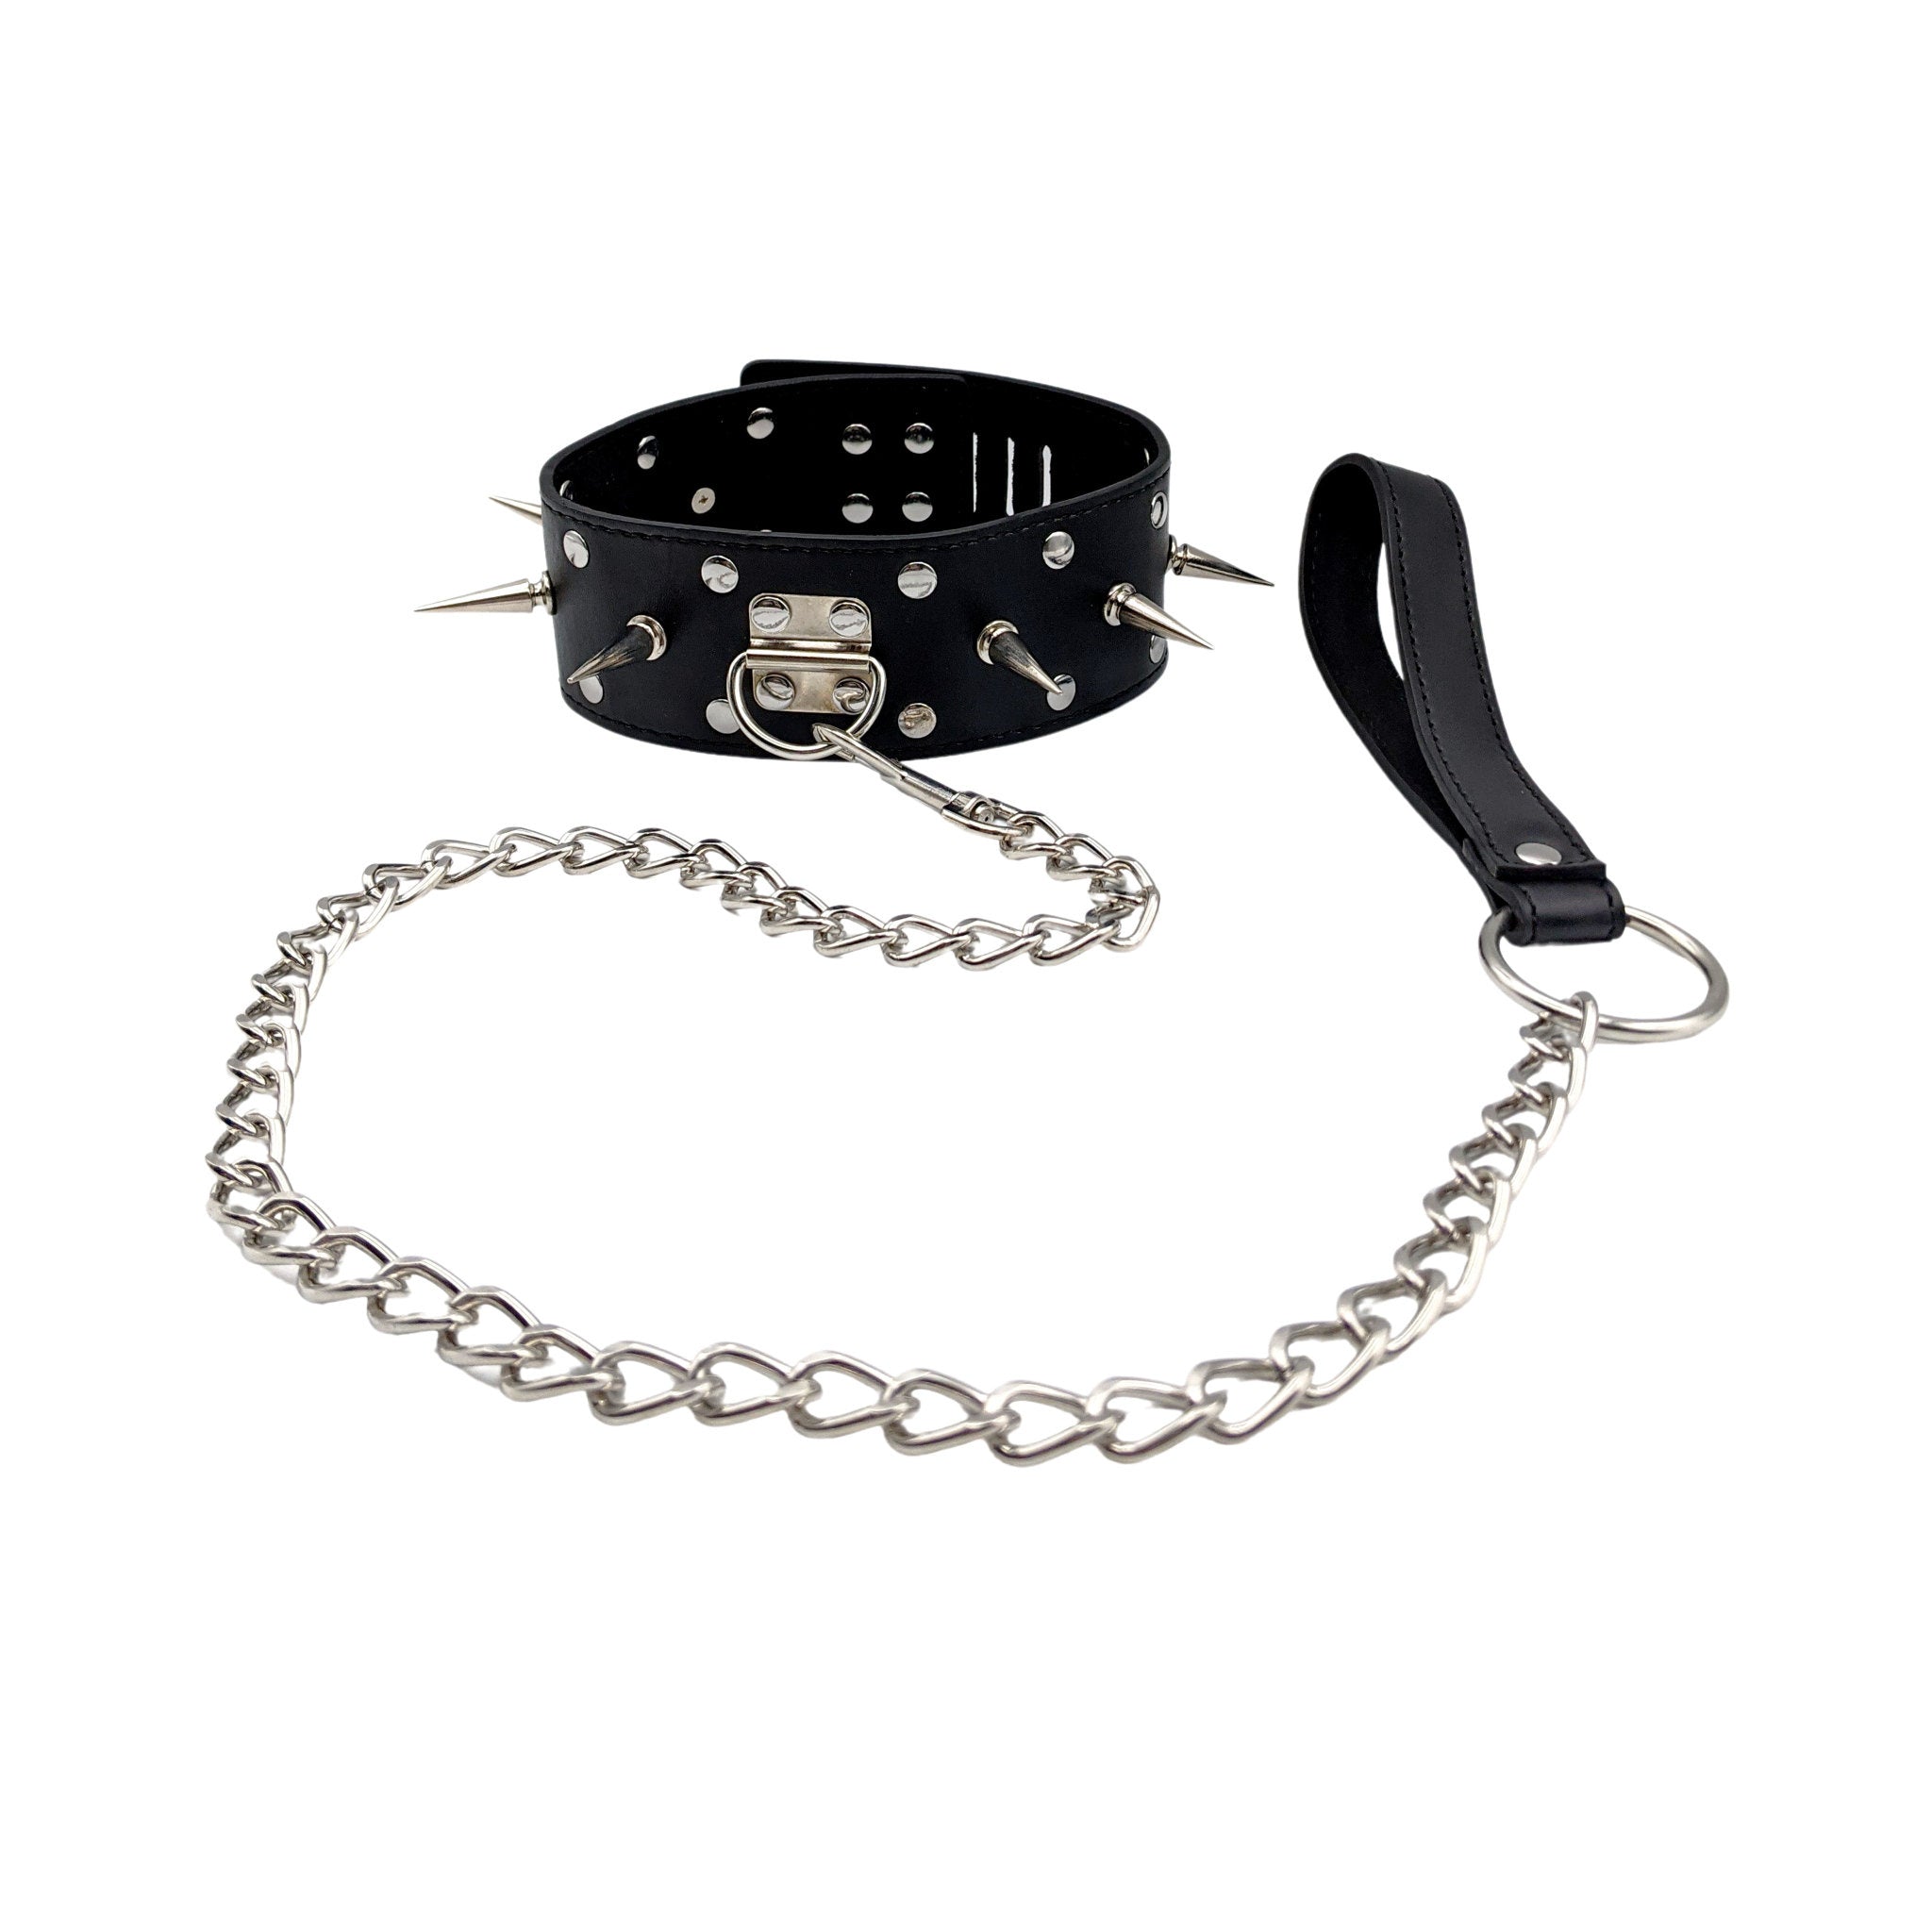 Lockable Collar With Spikes And Leash